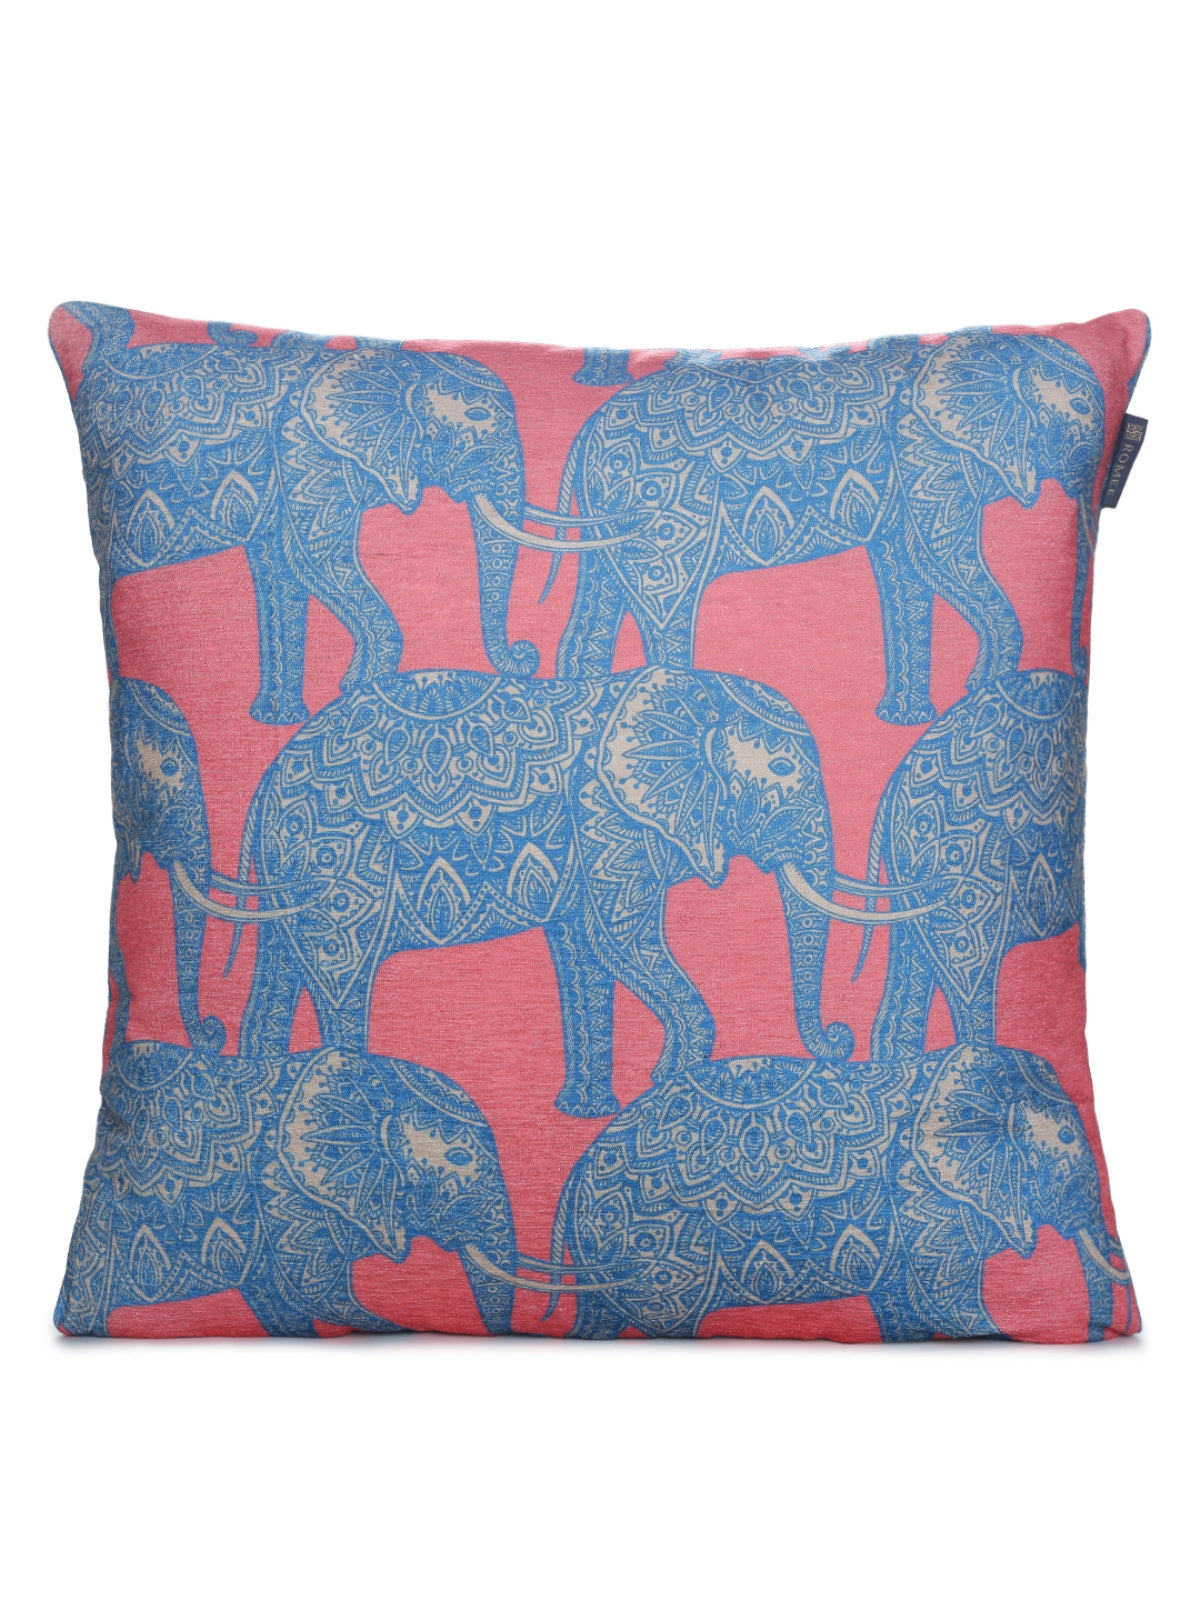 Blue and Dark Pink Set of 2 Cushion Covers 24x24 Inch